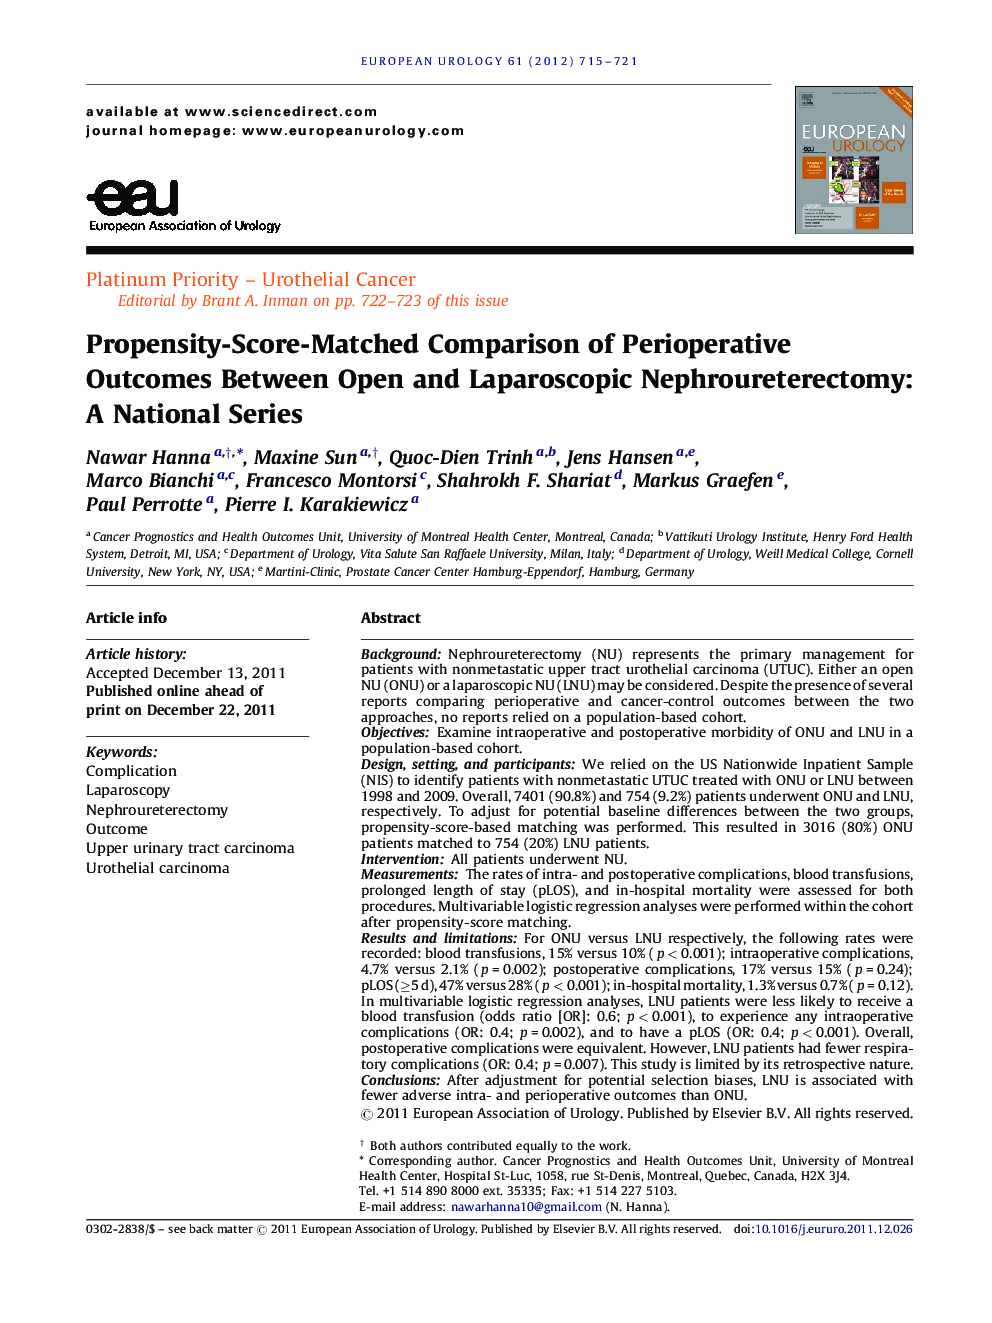 Propensity-Score-Matched Comparison of Perioperative Outcomes Between Open and Laparoscopic Nephroureterectomy: A National Series